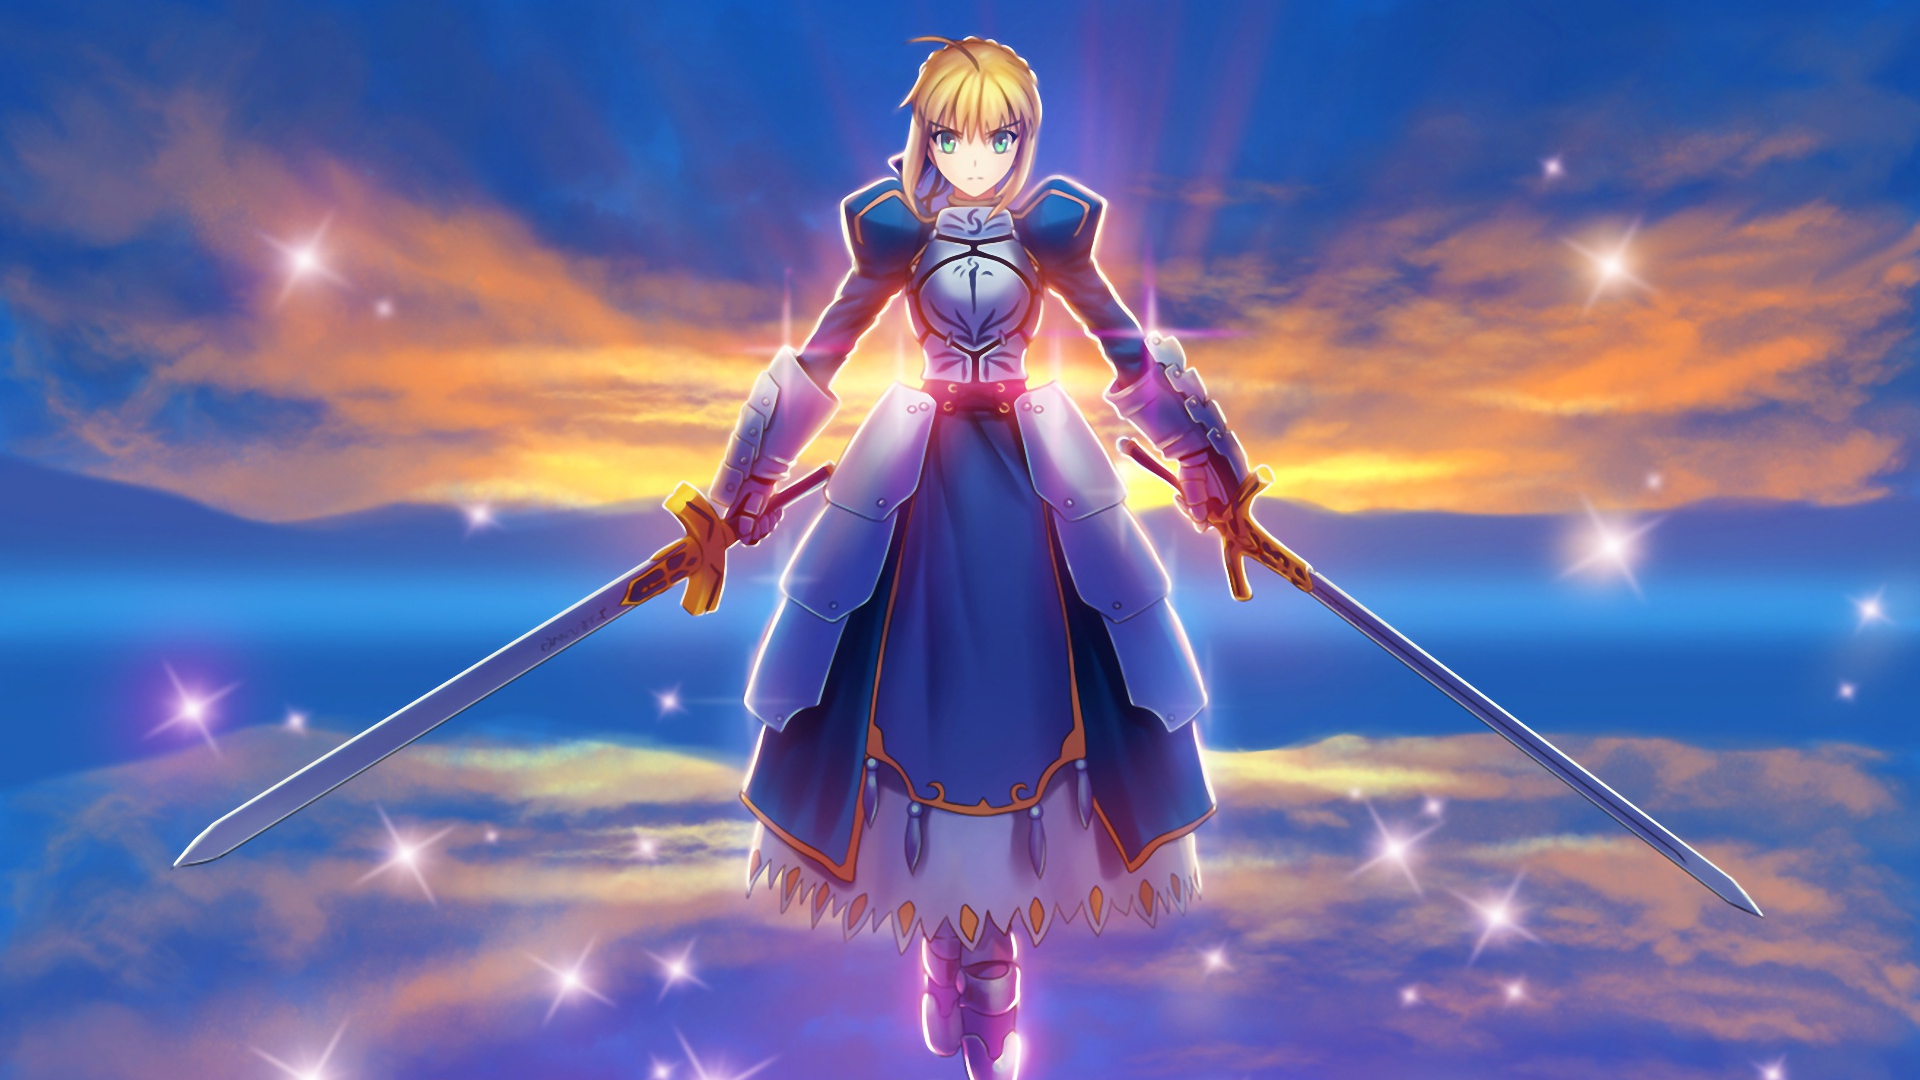 Download 1920X1080 Wallpaper Saber, Fate Series, Anime, Full Hd, Hdtv